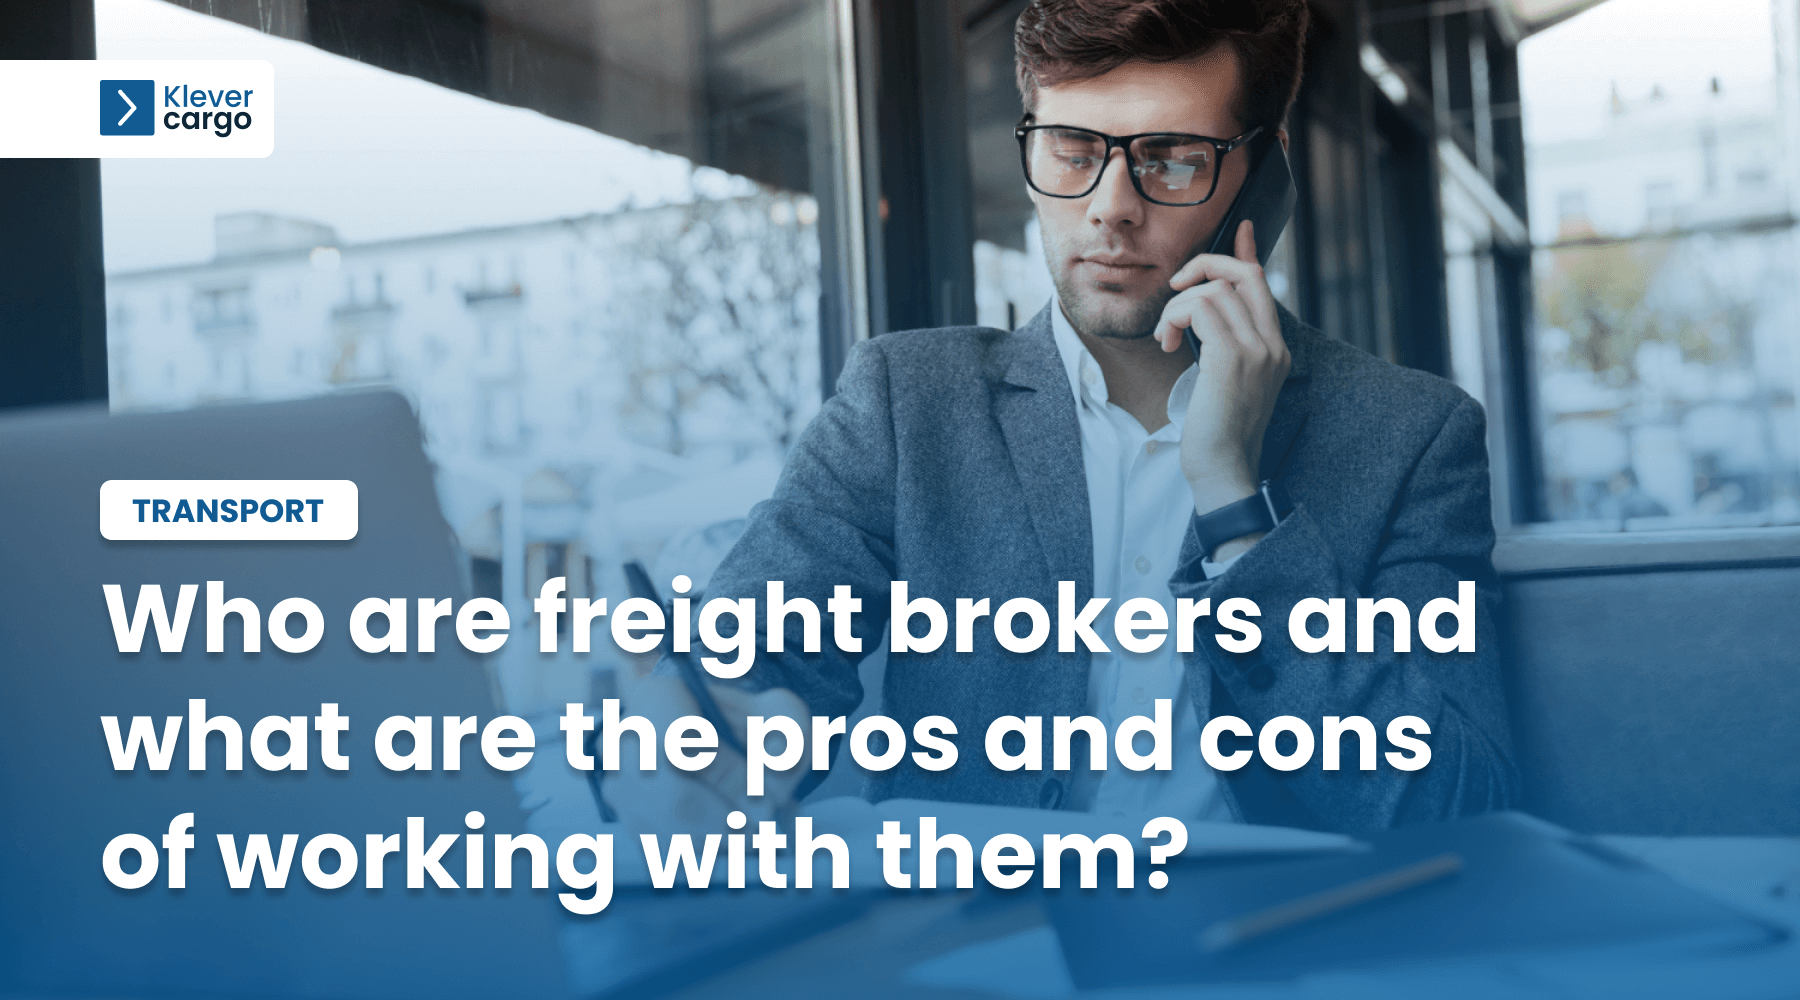 Freight brokers